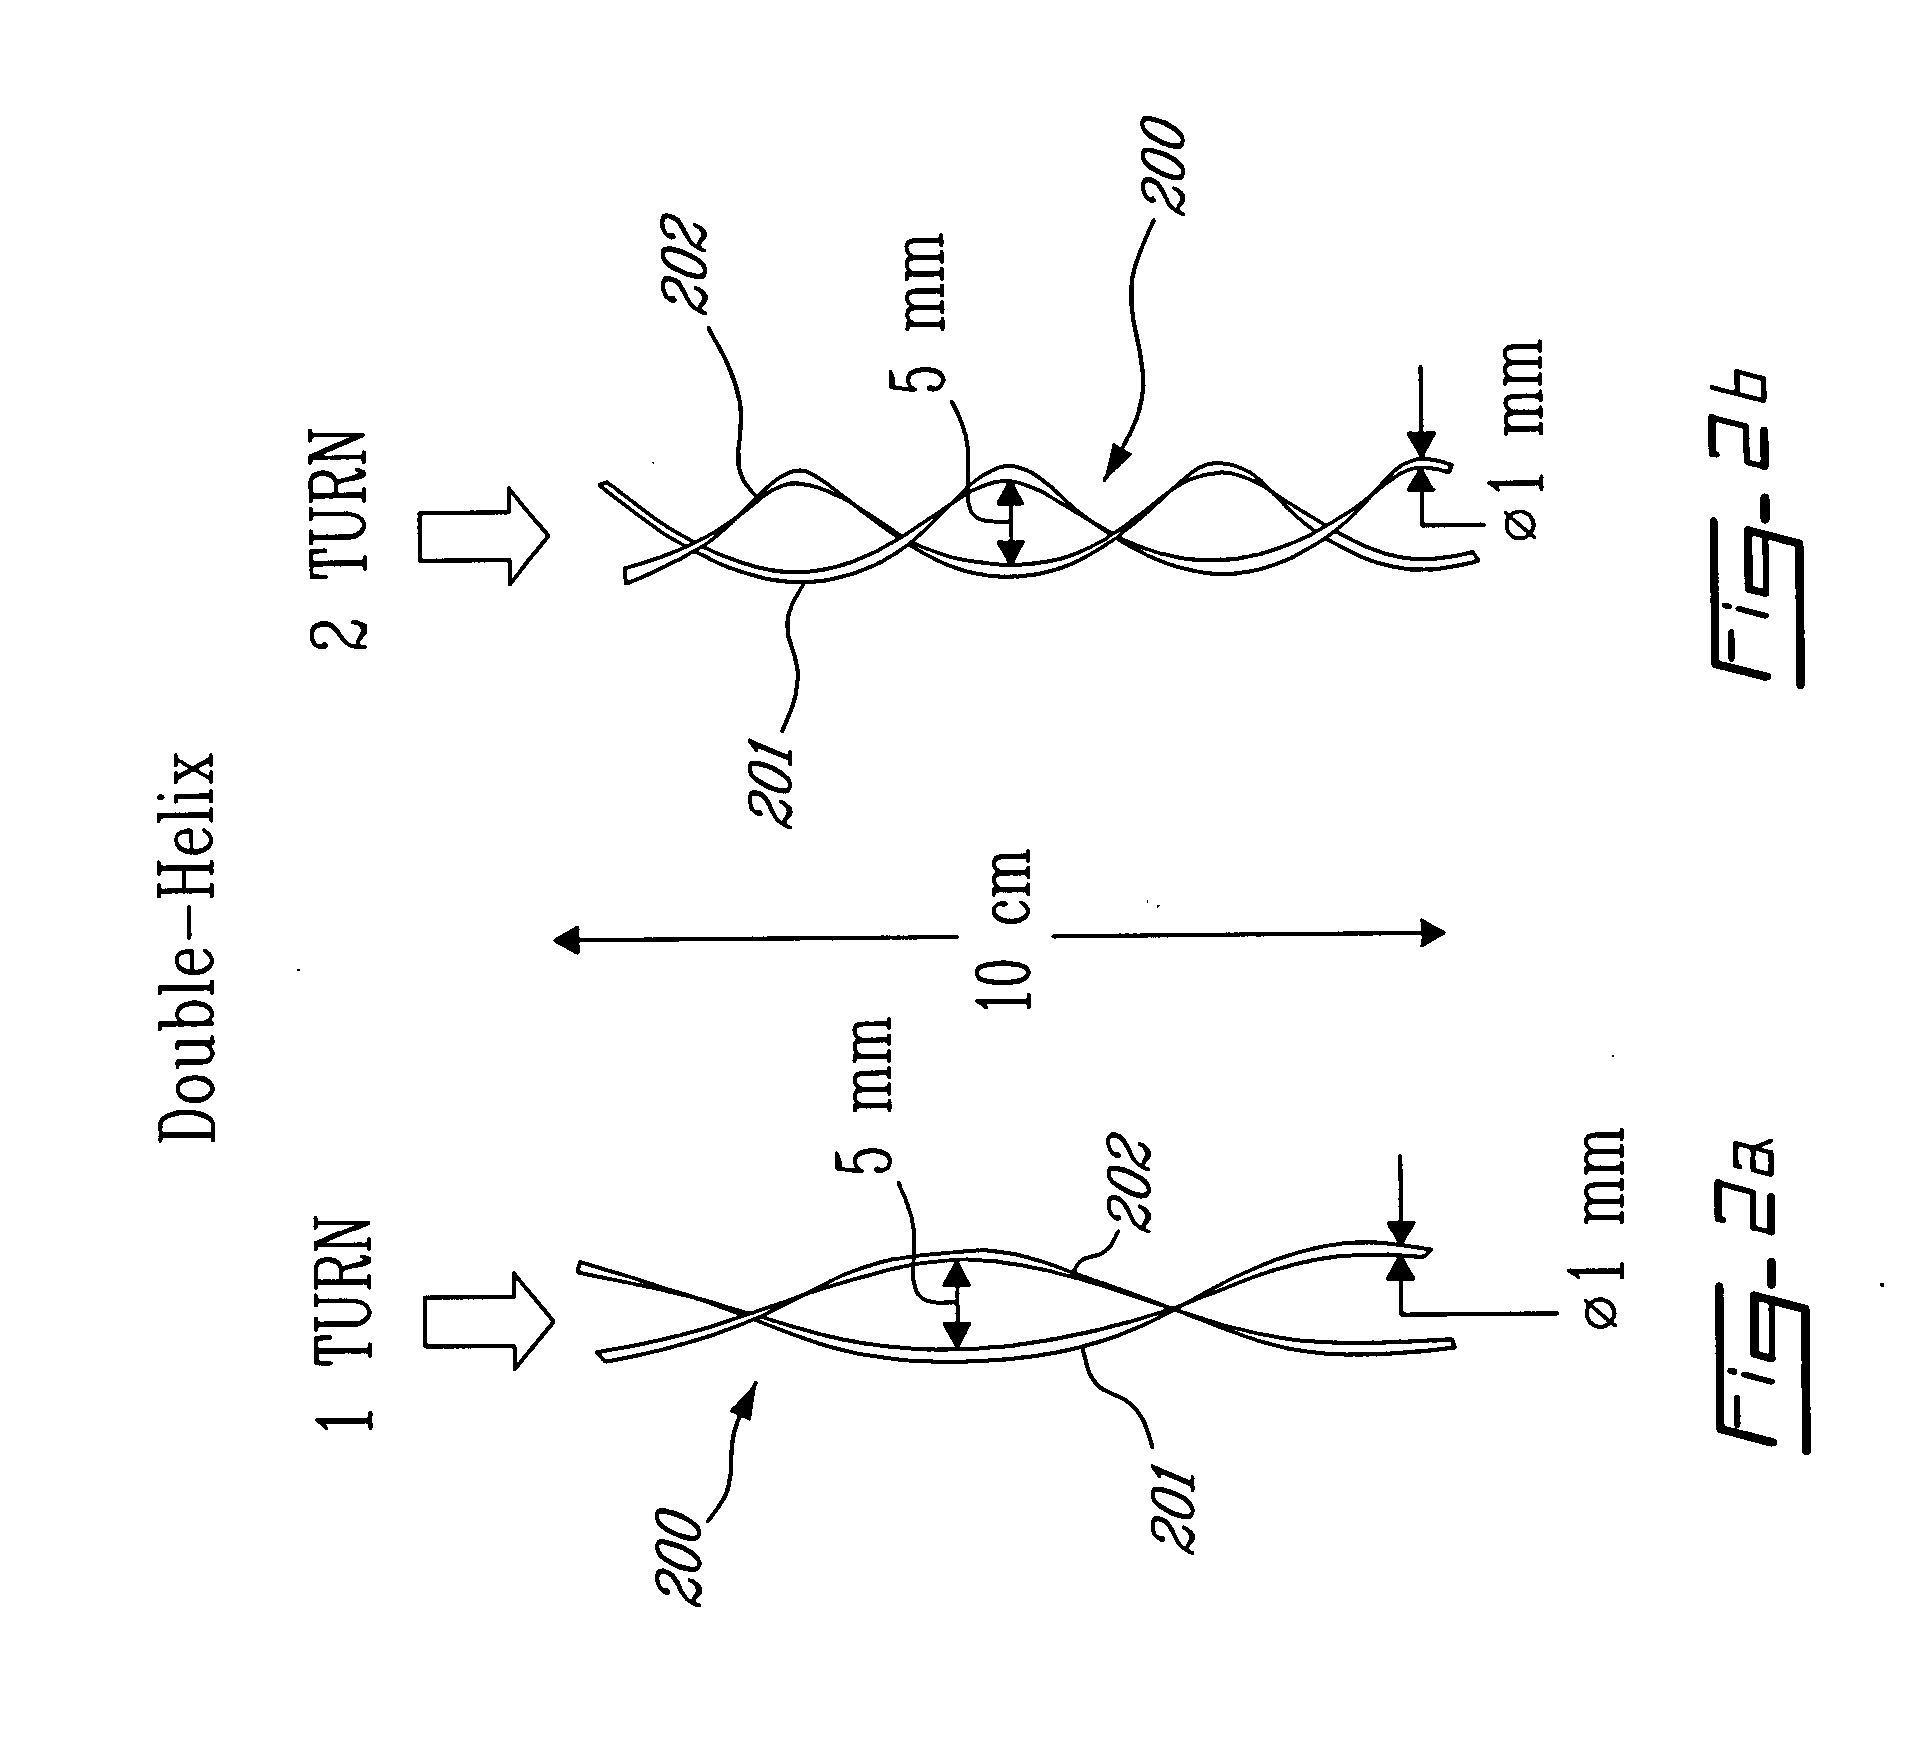 Catheter for transdiaphragmatic pressure and diaphragm electromyogram recording using helicoidal electrodes